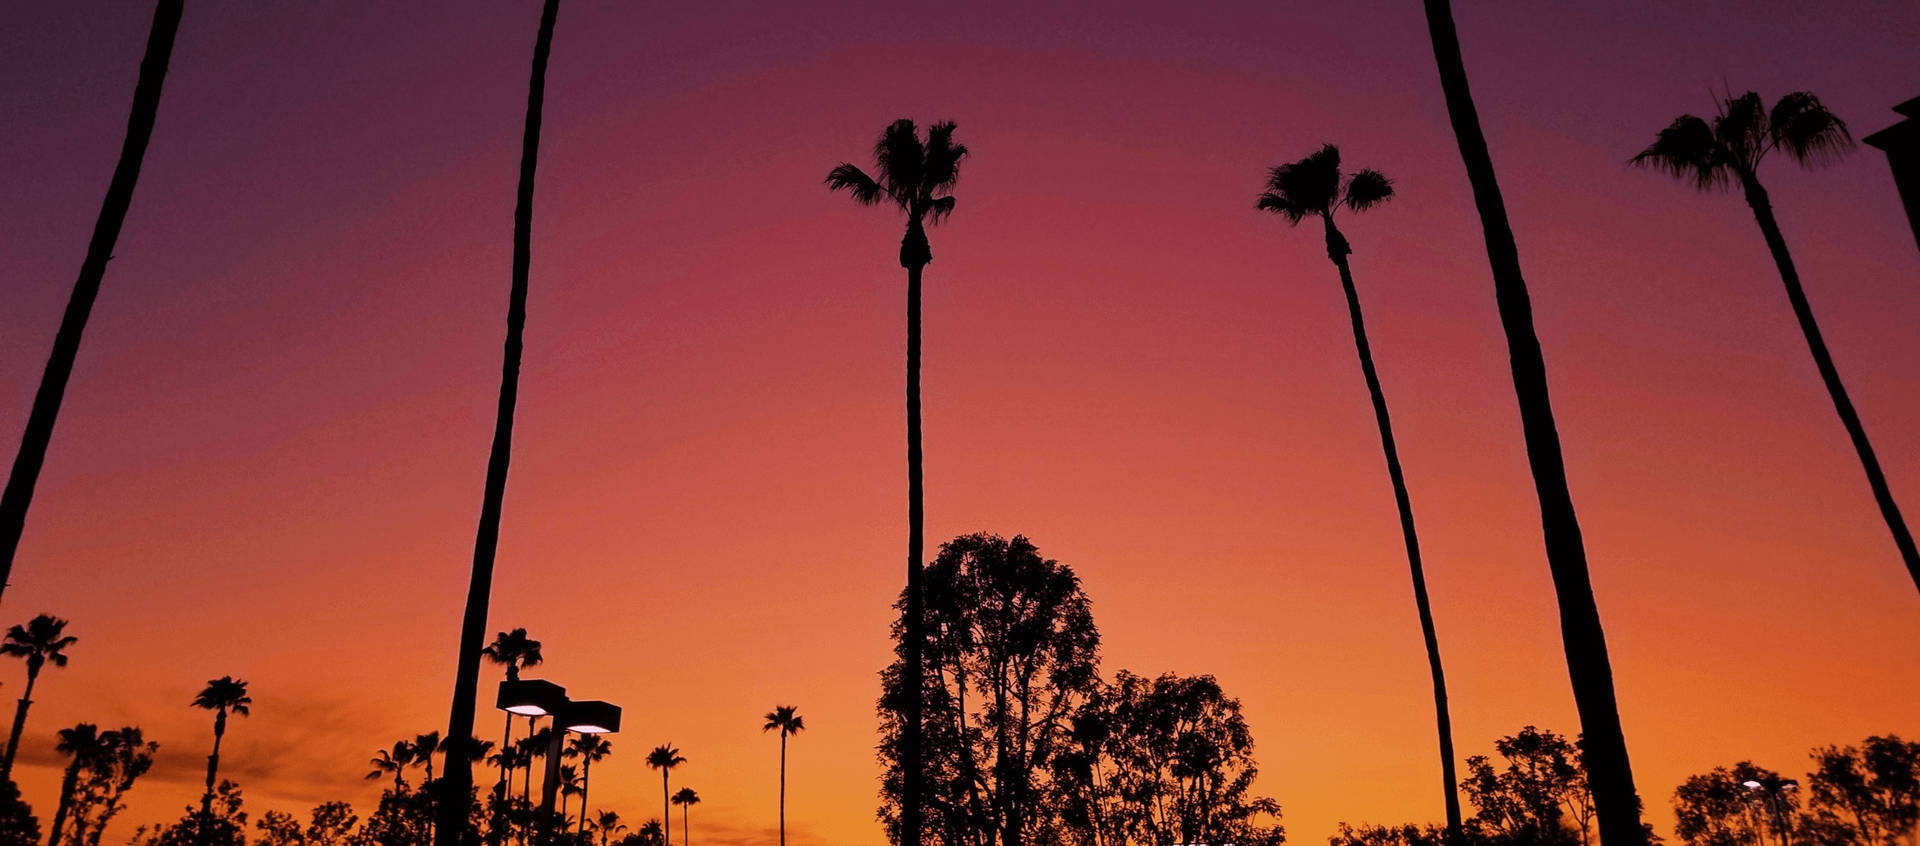 Los Angeles Sunset Over Trees Wallpaper